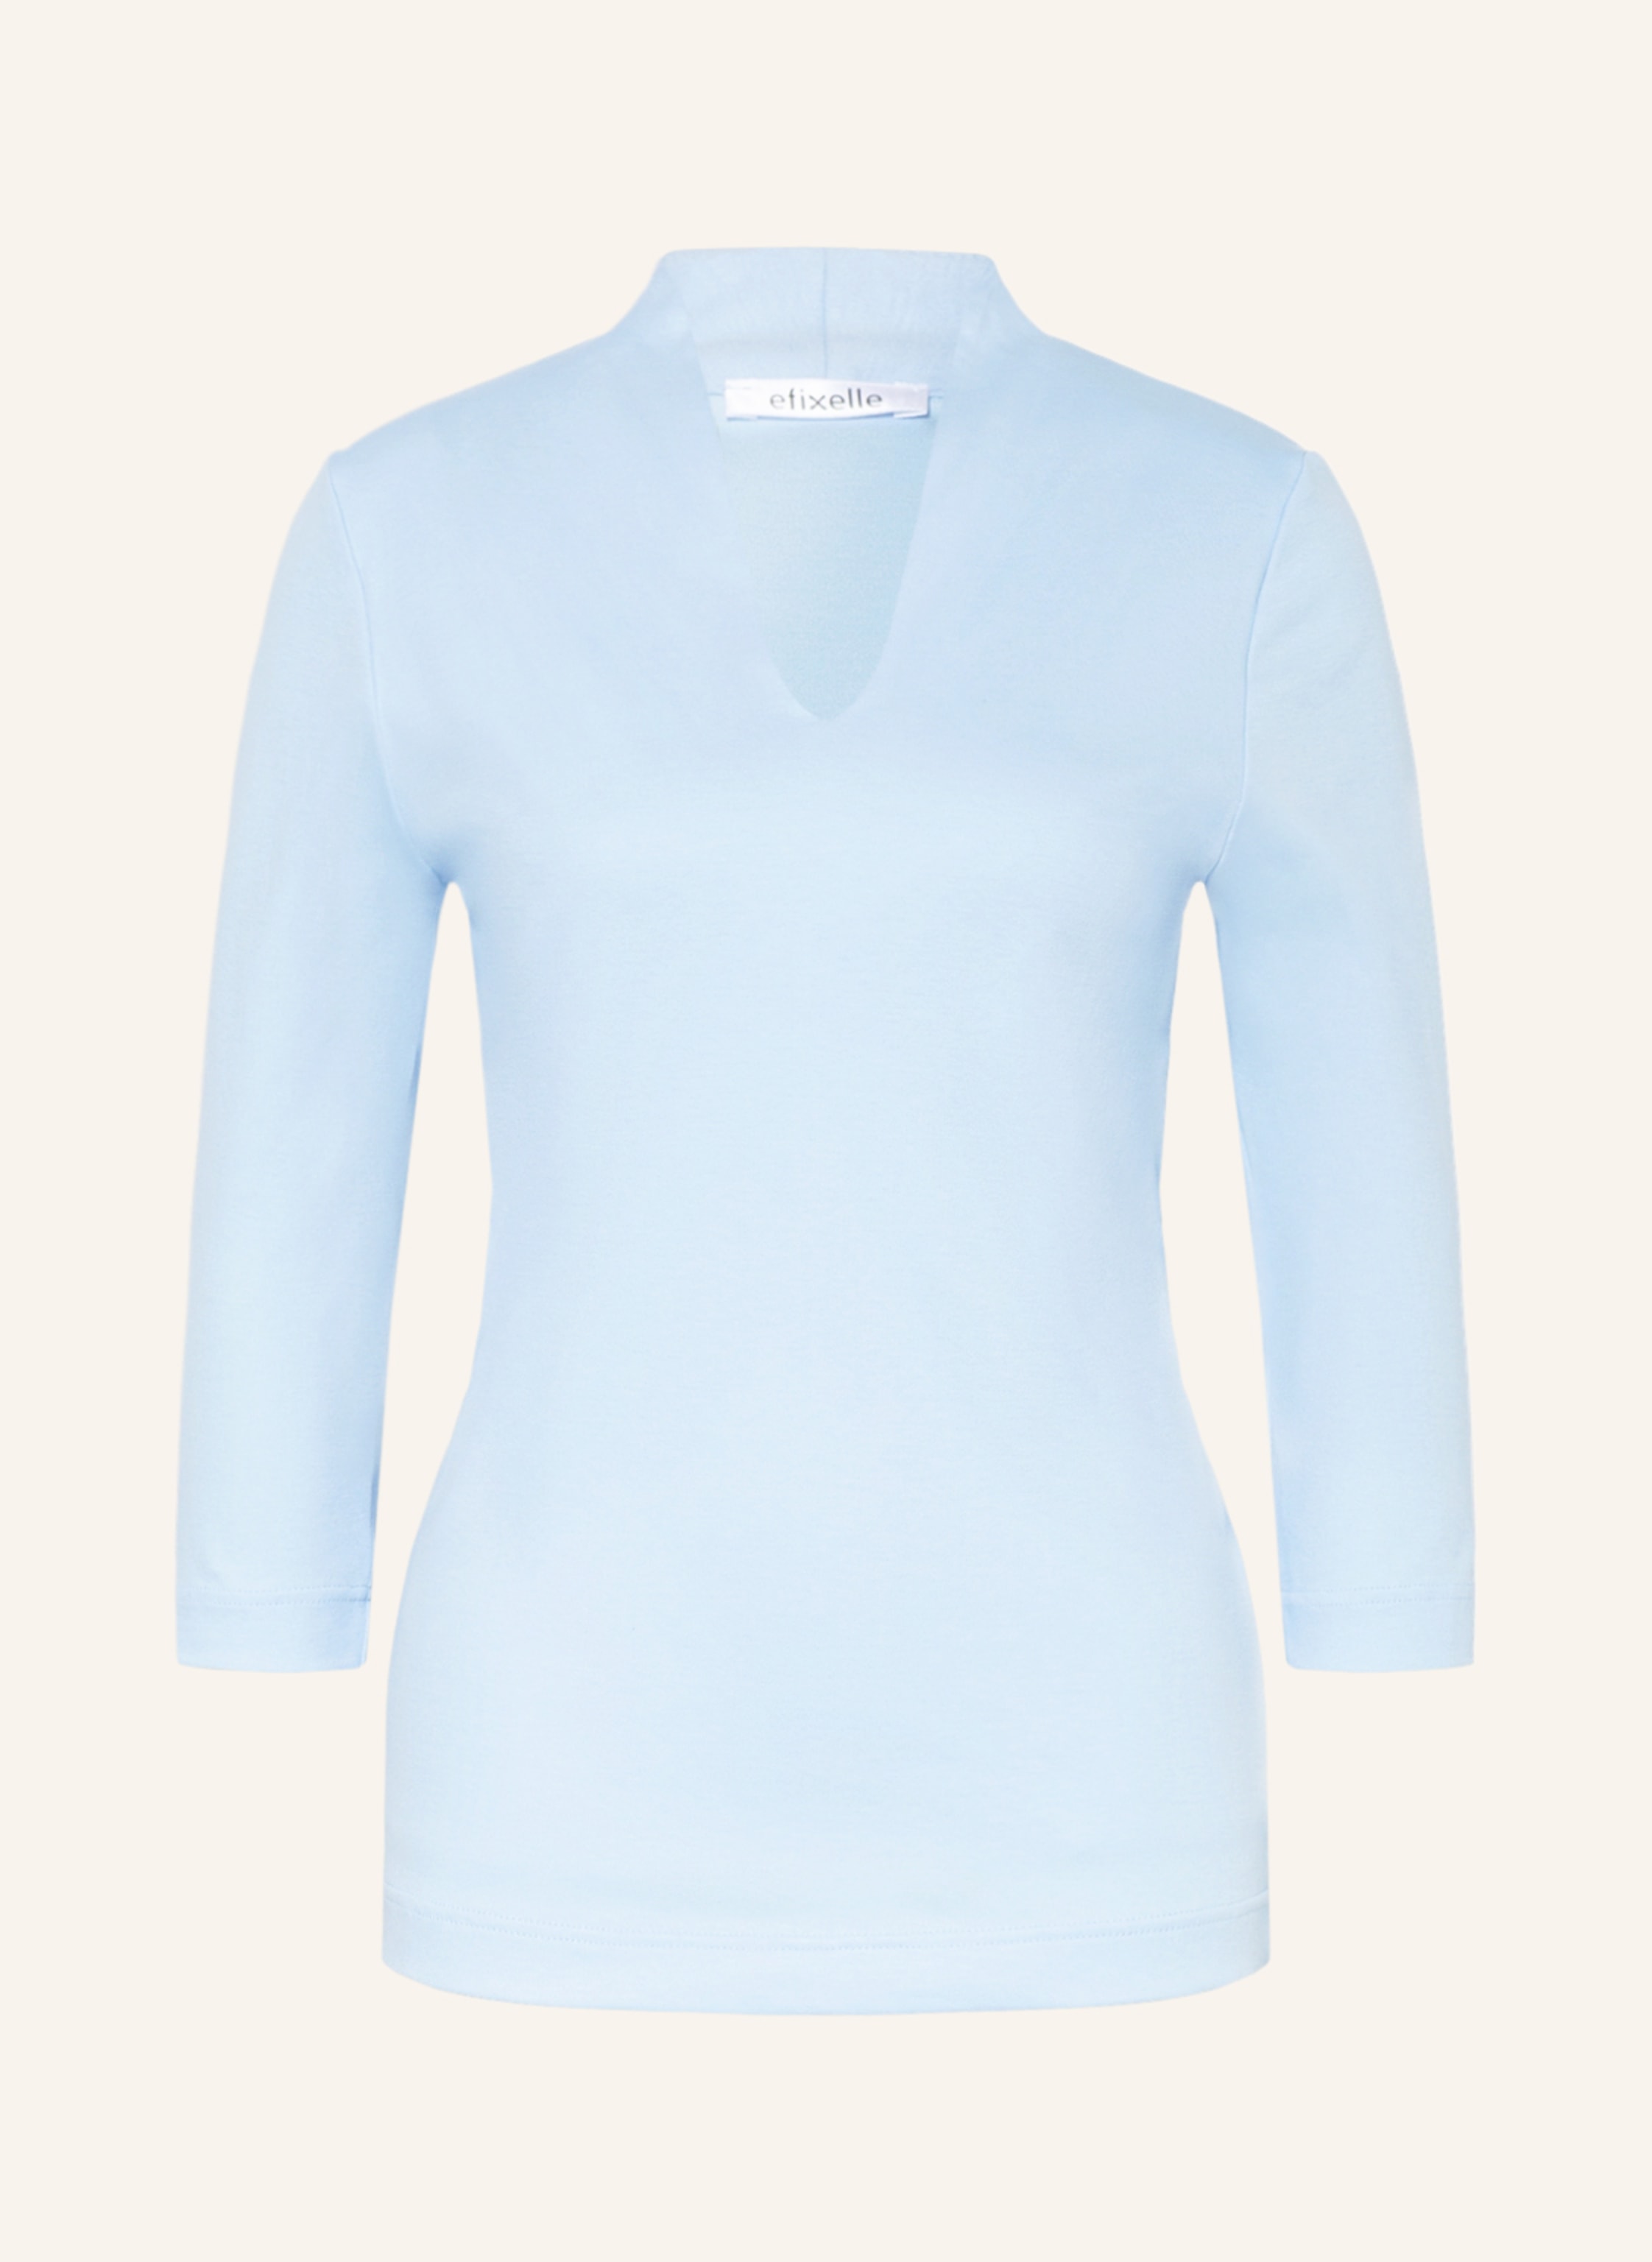 efixelle Shirt with sleeves in light blue